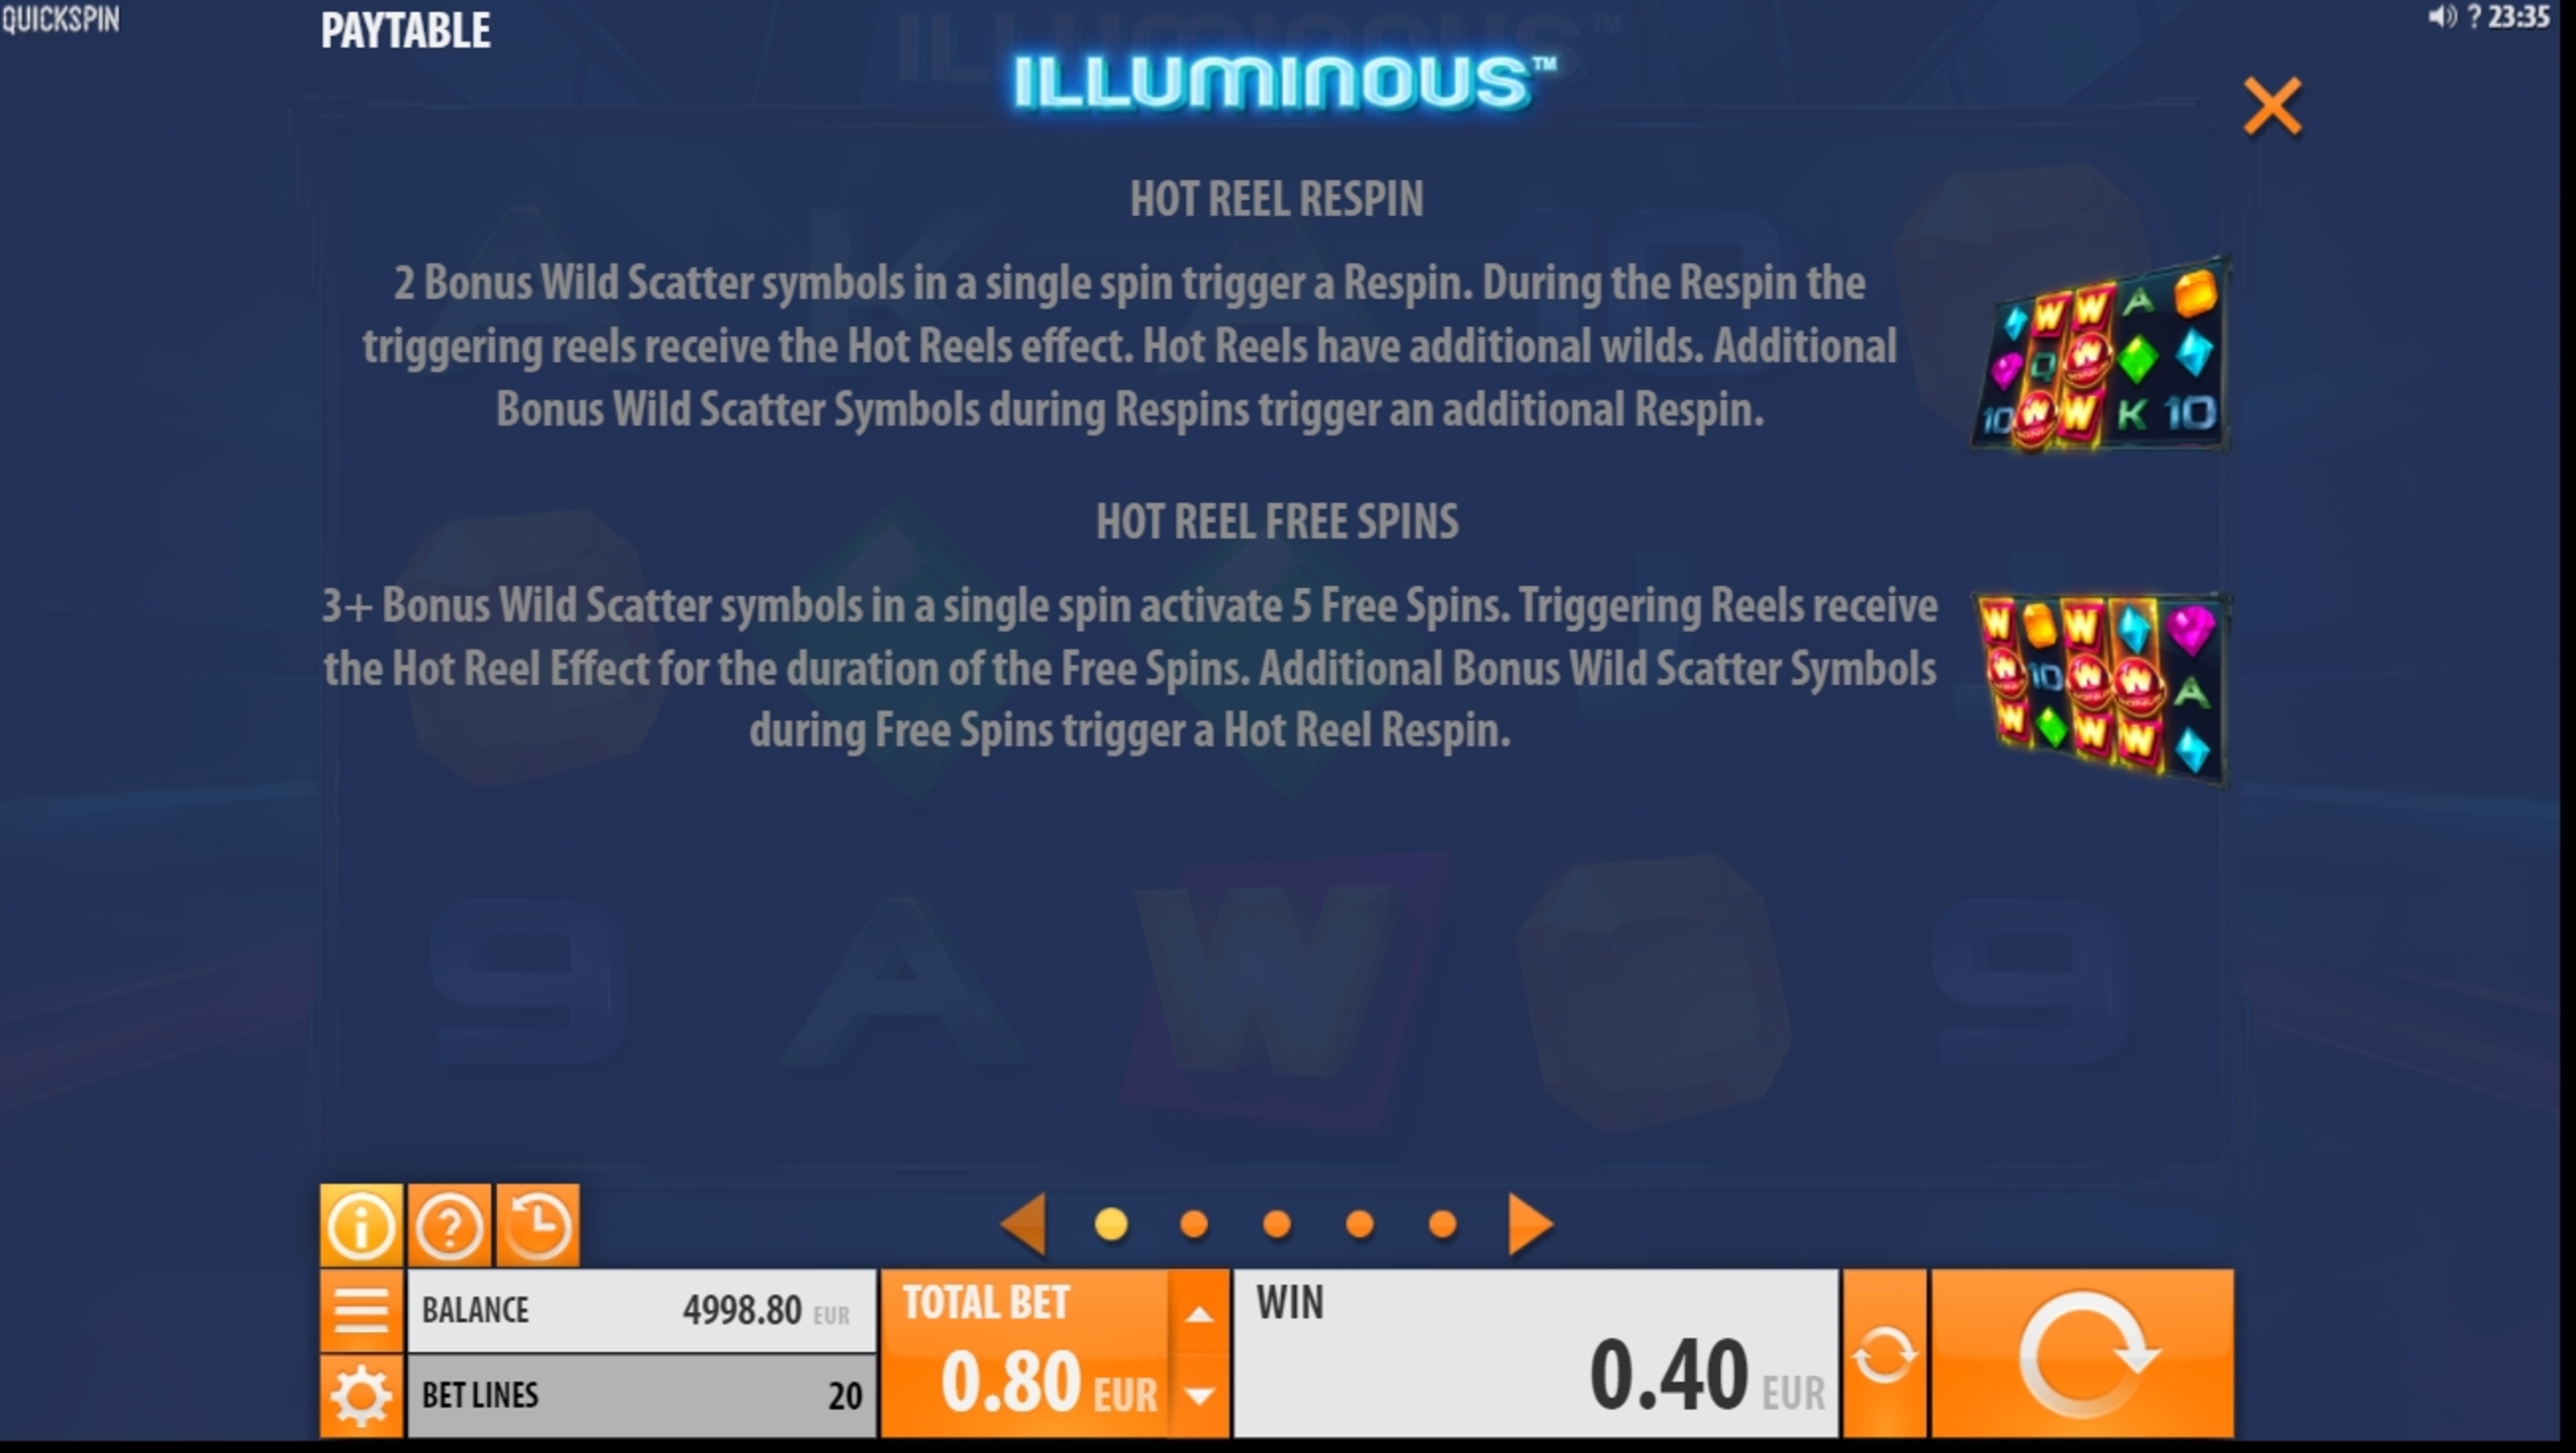 Info of Illuminous Slot Game by Quickspin